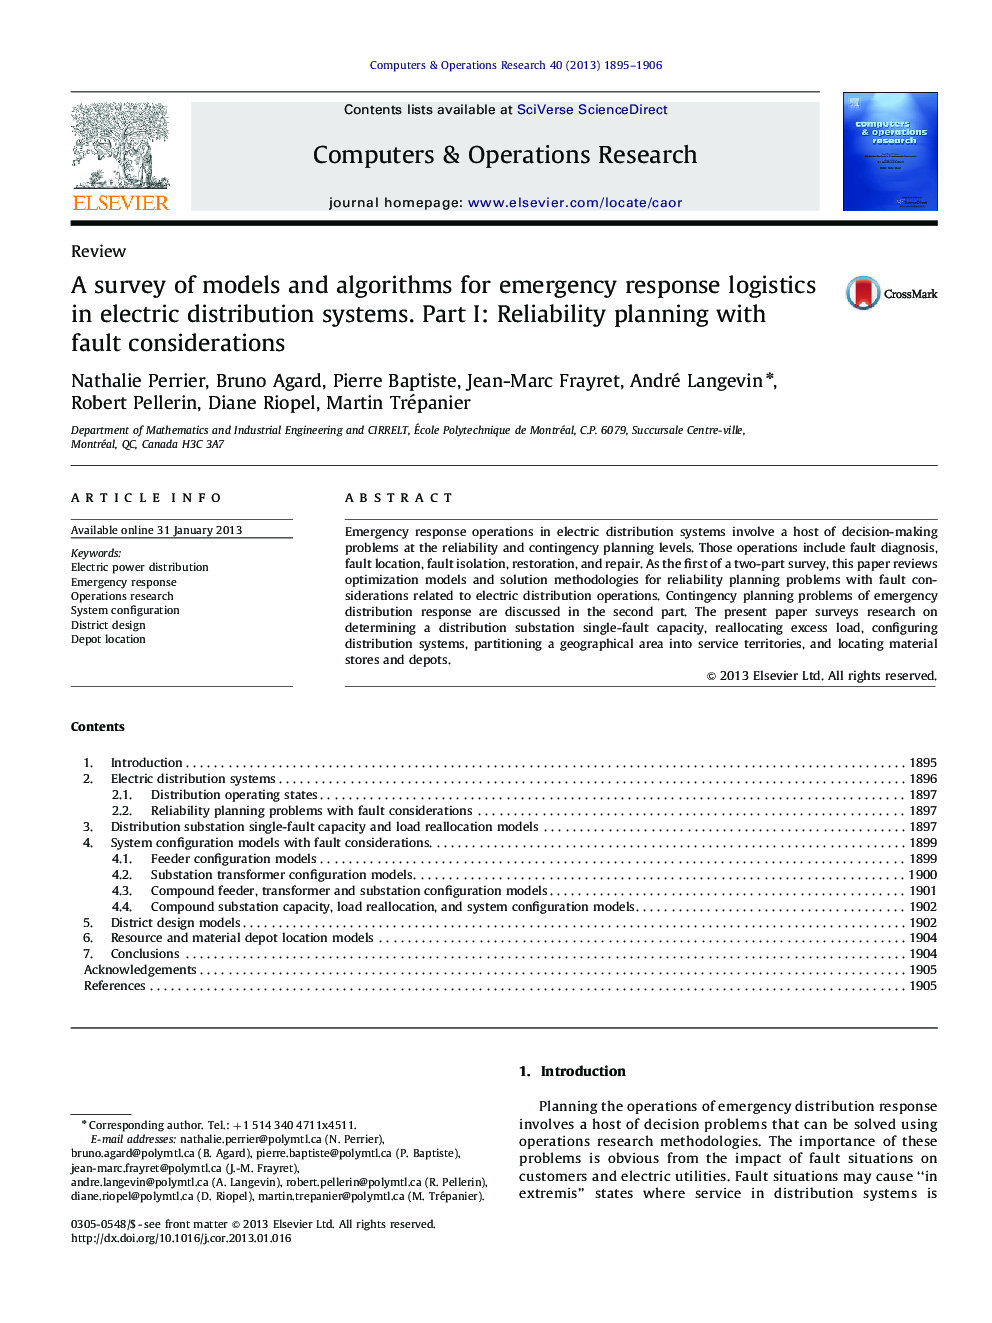 A survey of models and algorithms for emergency response logistics in electric distribution systems. Part I: Reliability planning with fault considerations